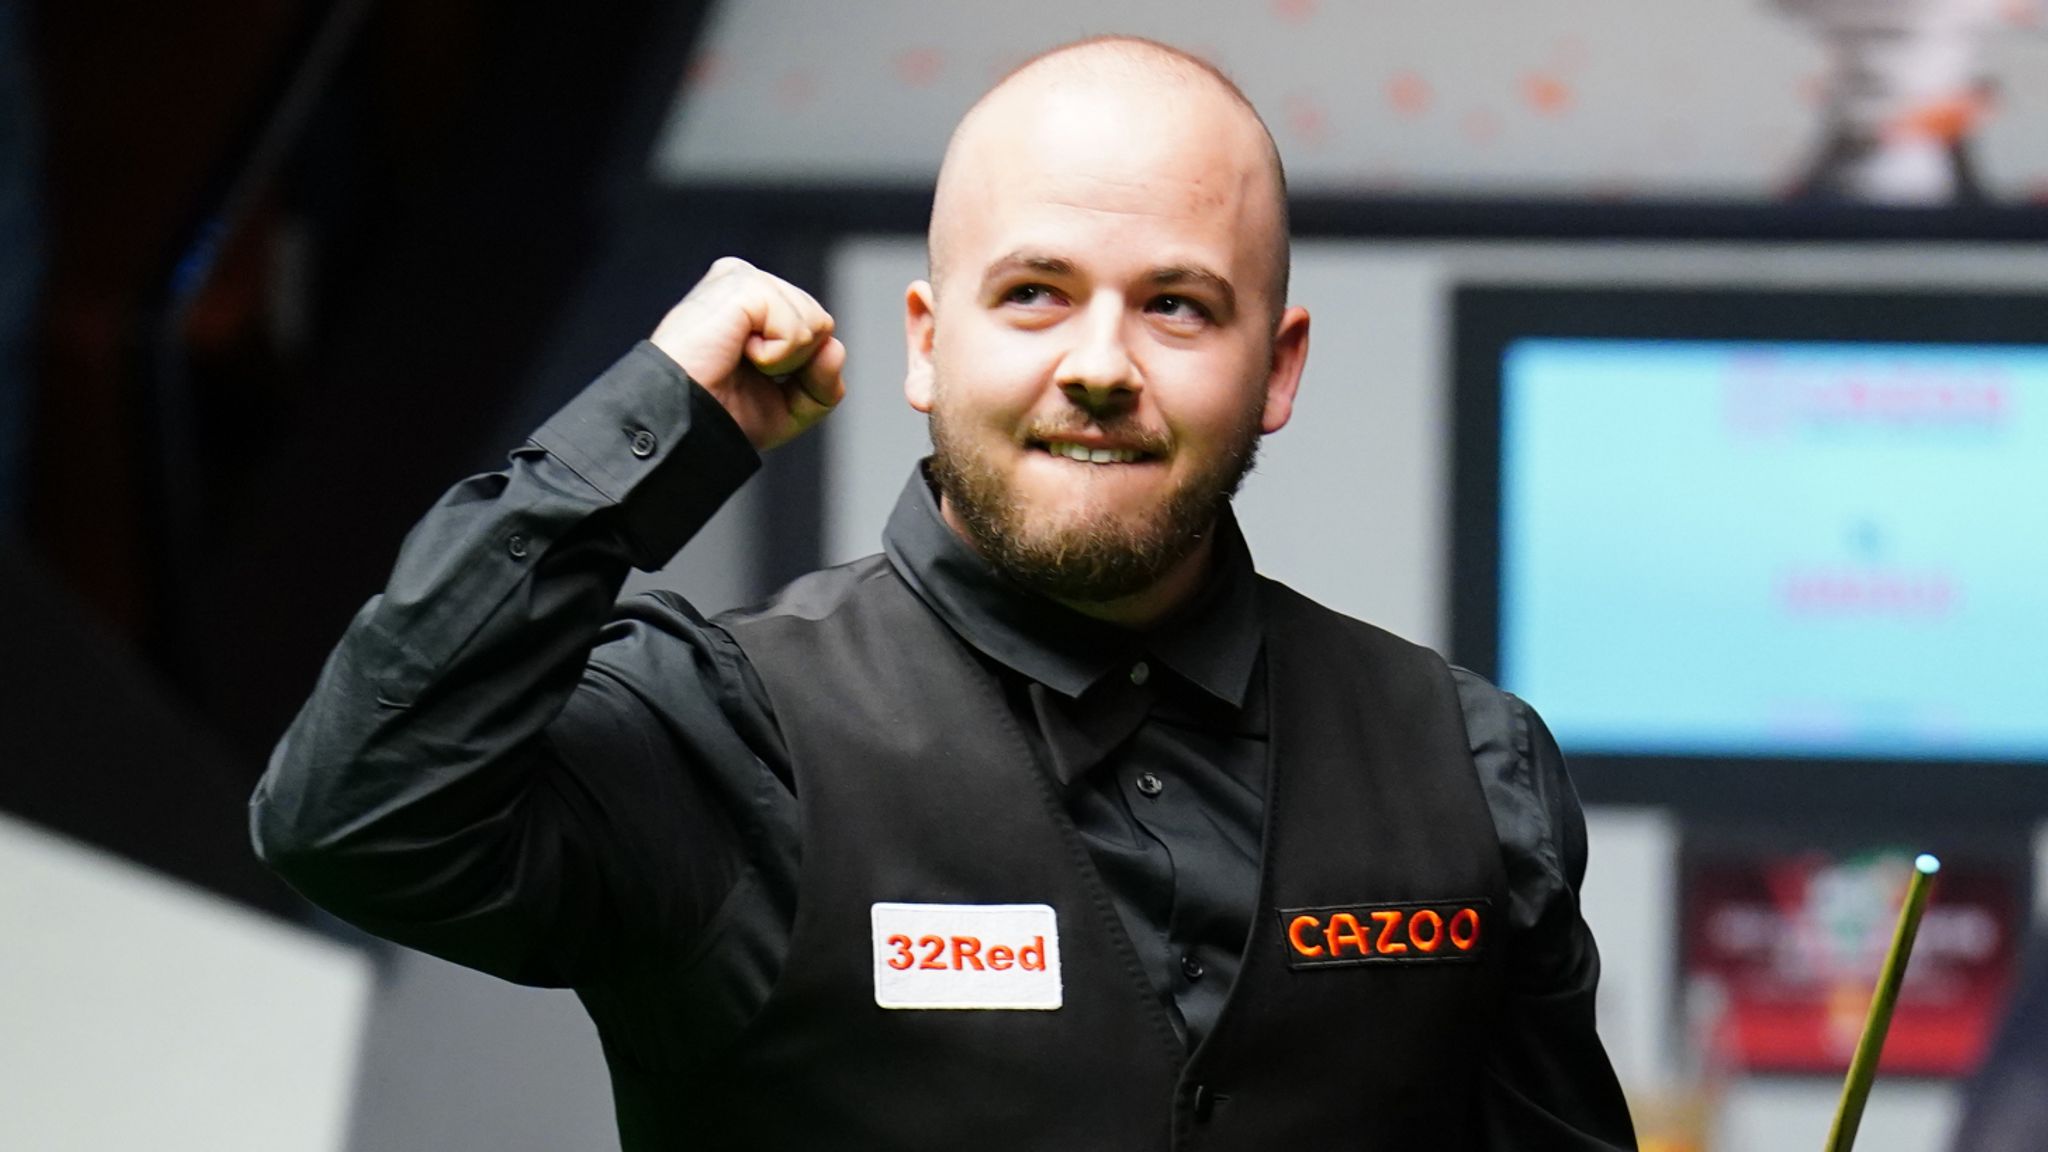 World Snooker Championship Luca Brecel pulls off greatest Crucible comeback to stun Si Jiahui and reach final Snooker News Sky Sports